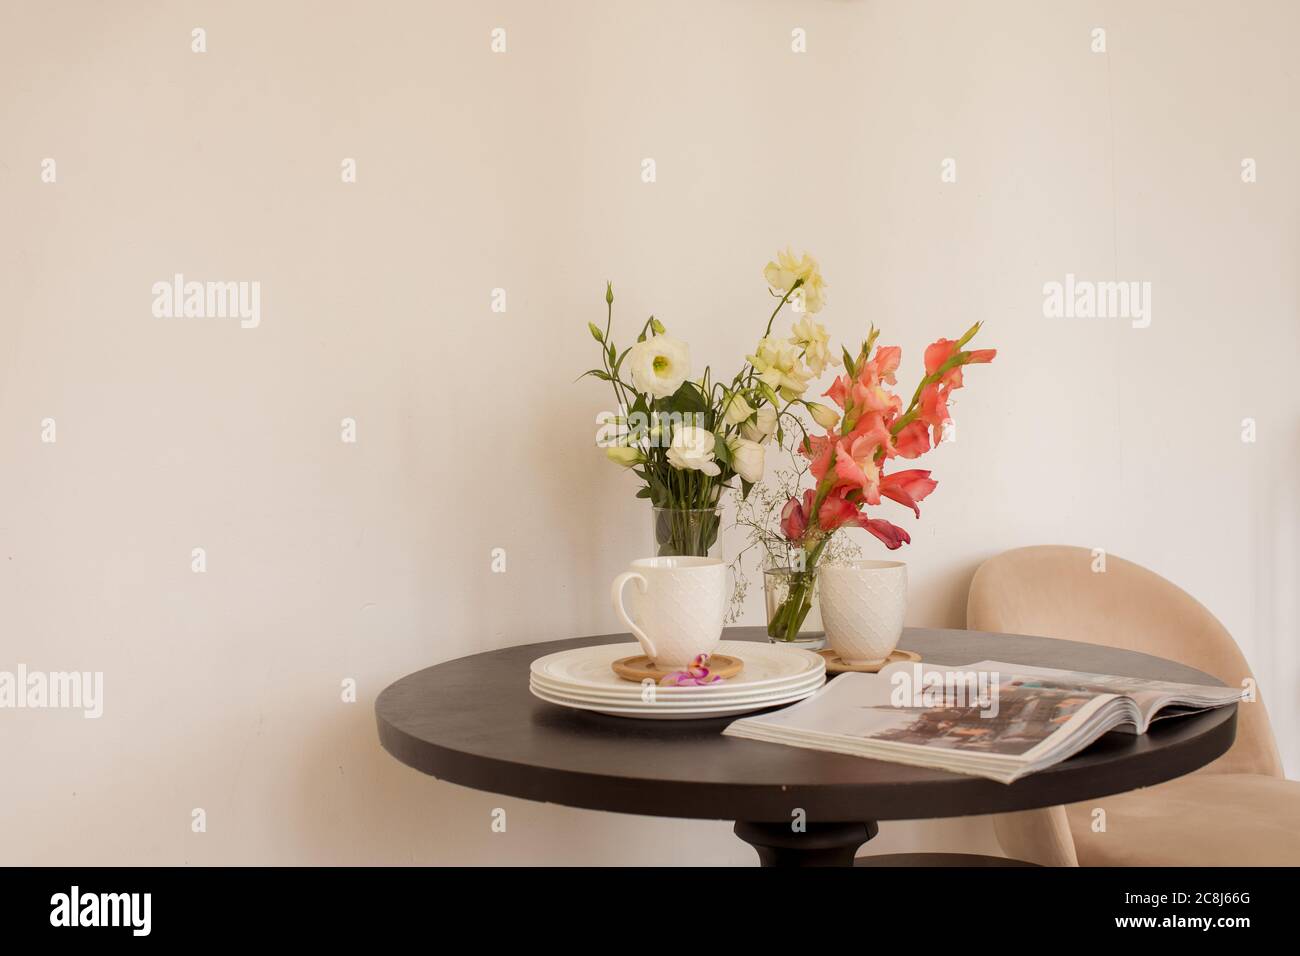 Flowers and magazine near dishware on table Stock Photo